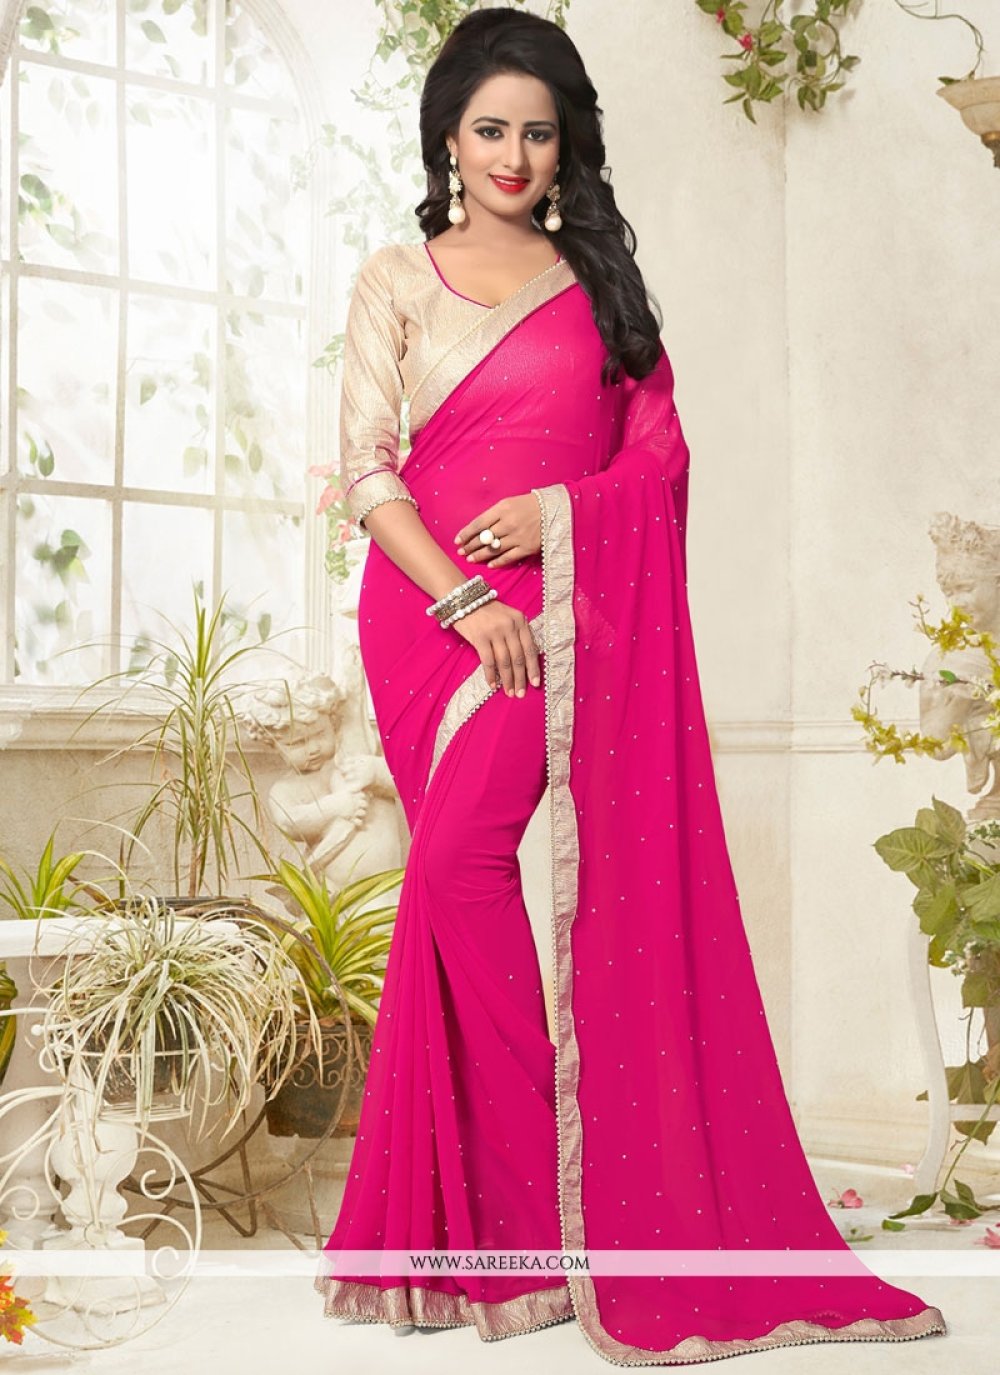 Buy Sarees (Saris) Online in Latest and Trendy Designs